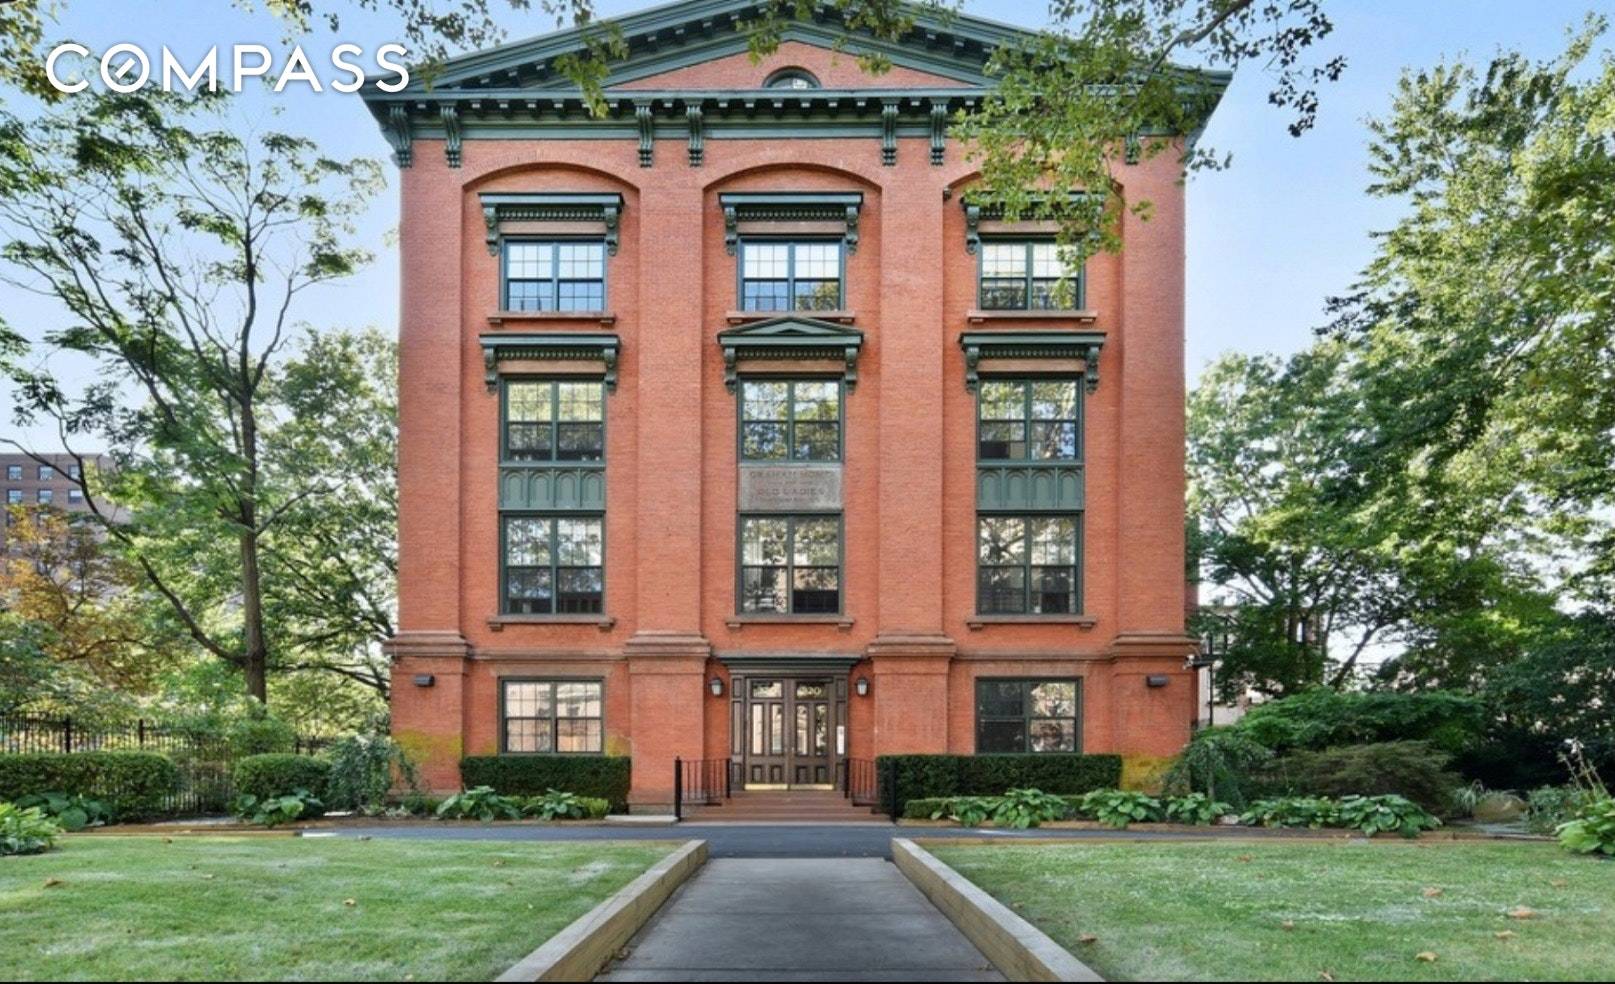 Rarely available, generously proportioned 2 bedroom, 2 bath located in the Graham Home for the Old Ladies an architectural gem located in Brooklyn's historic landmark district of Clinton Hill.